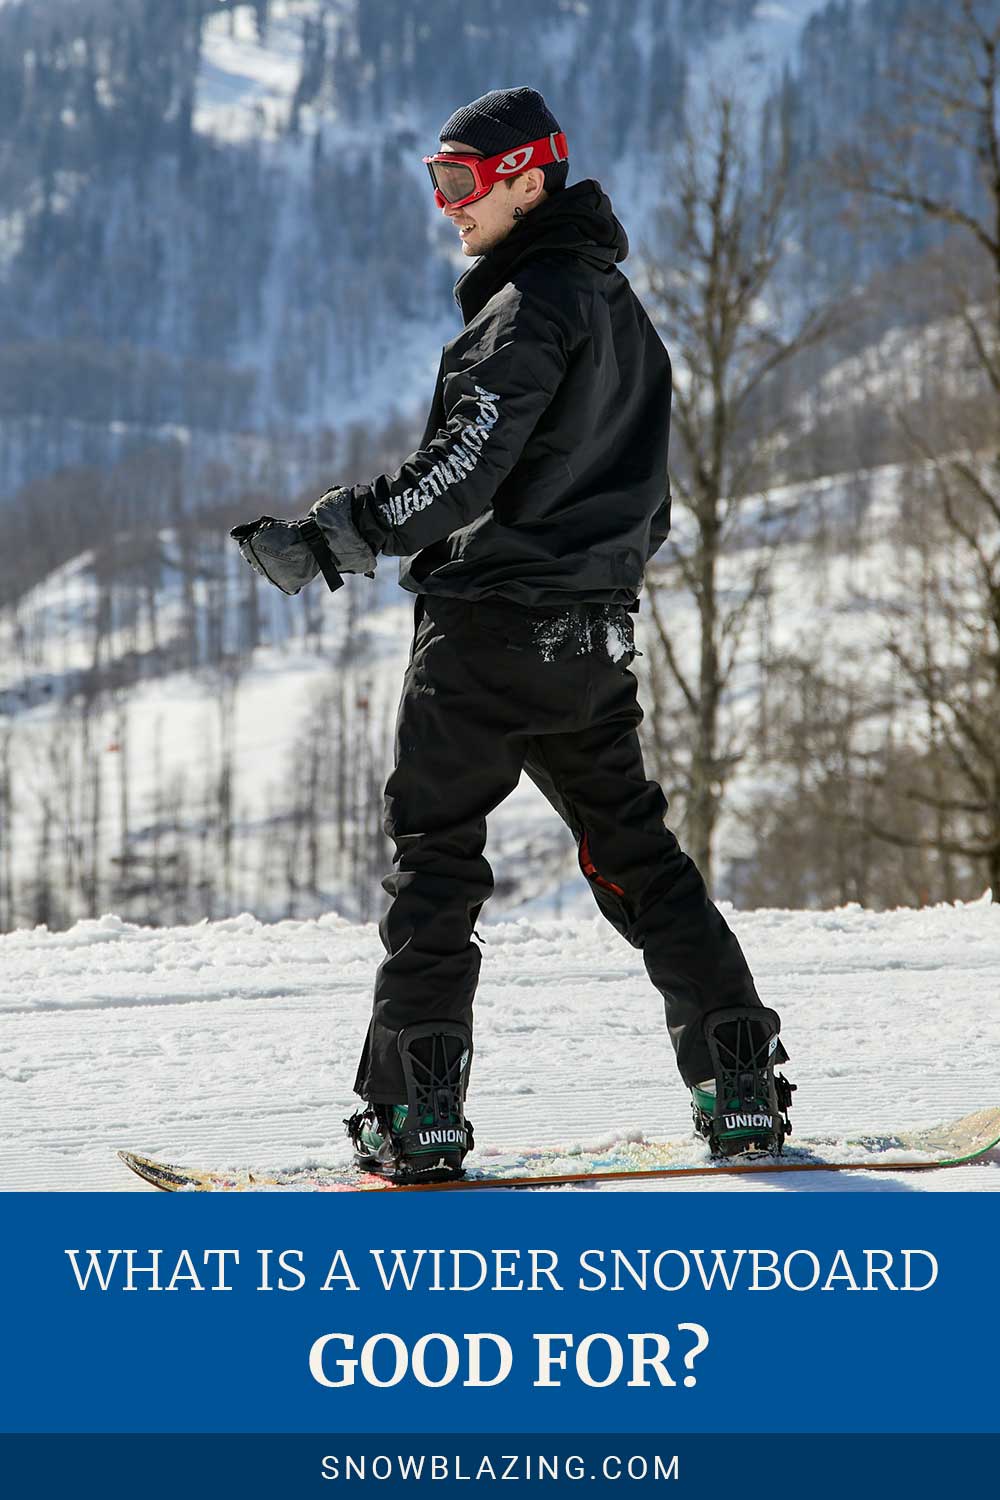 Smiling man in a snowboard track wearing black jacket and red googles - What Is a Wider board good for?